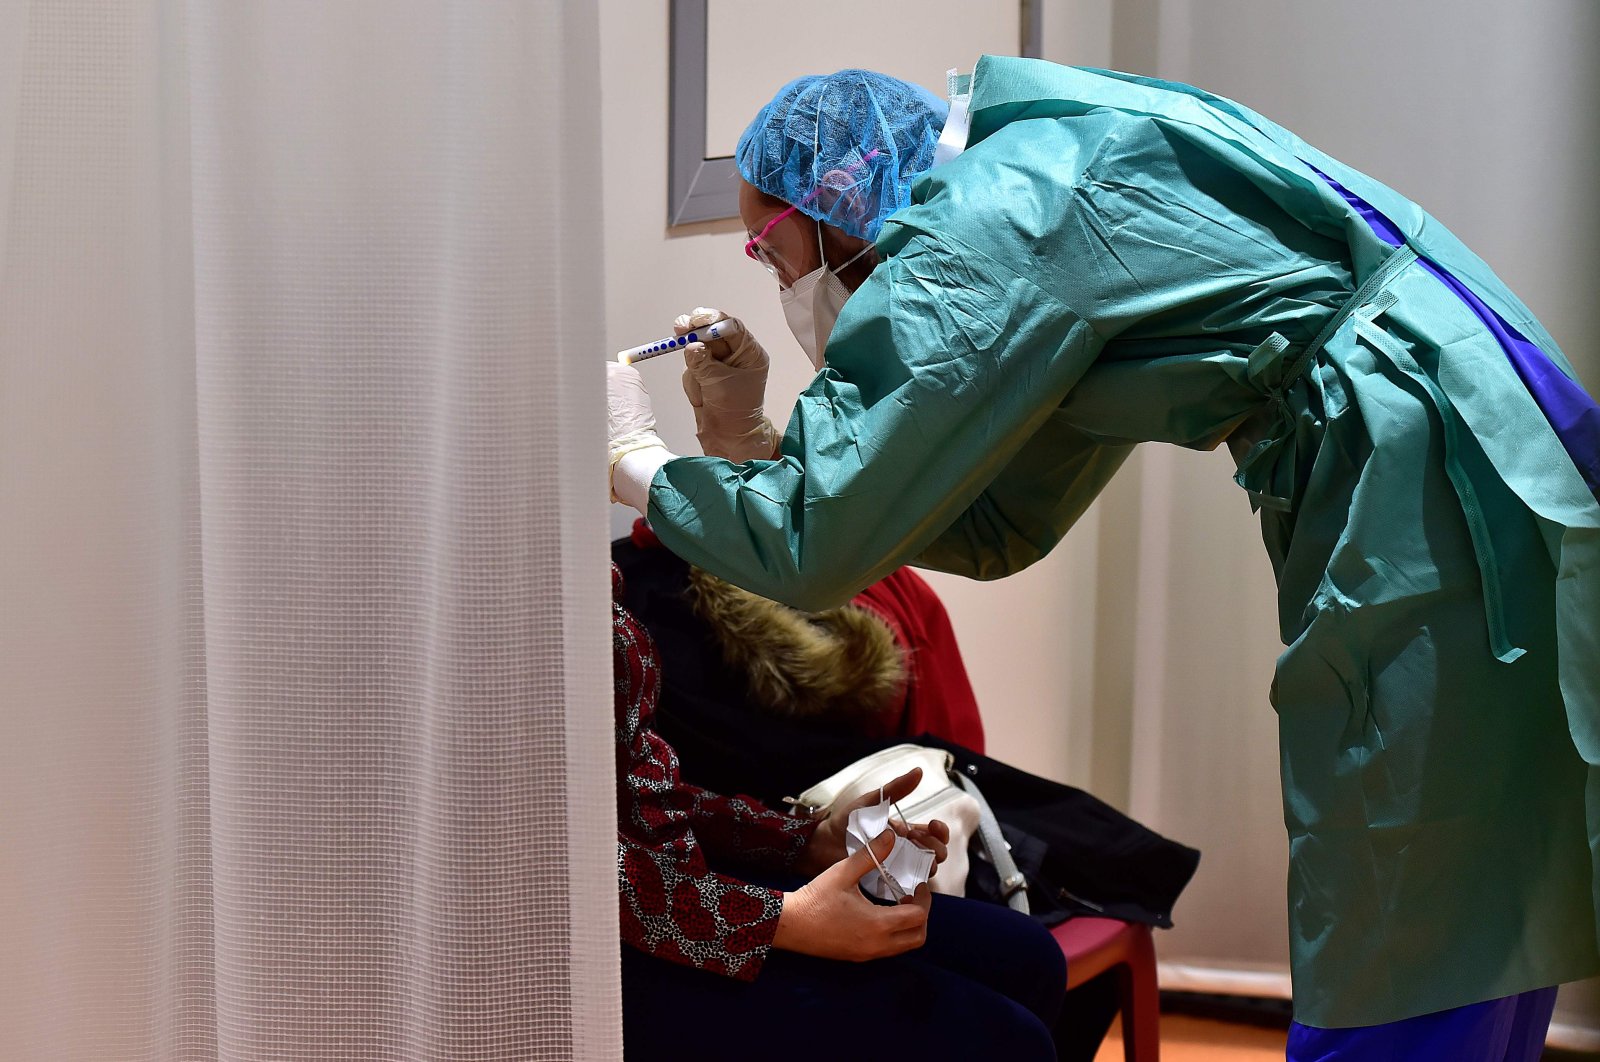 A doctor examines a patient at the hospital screening unit of the CHU Pellegrin in Bordeaux, southwestern France on March 9, 2020. (AFP Photo)